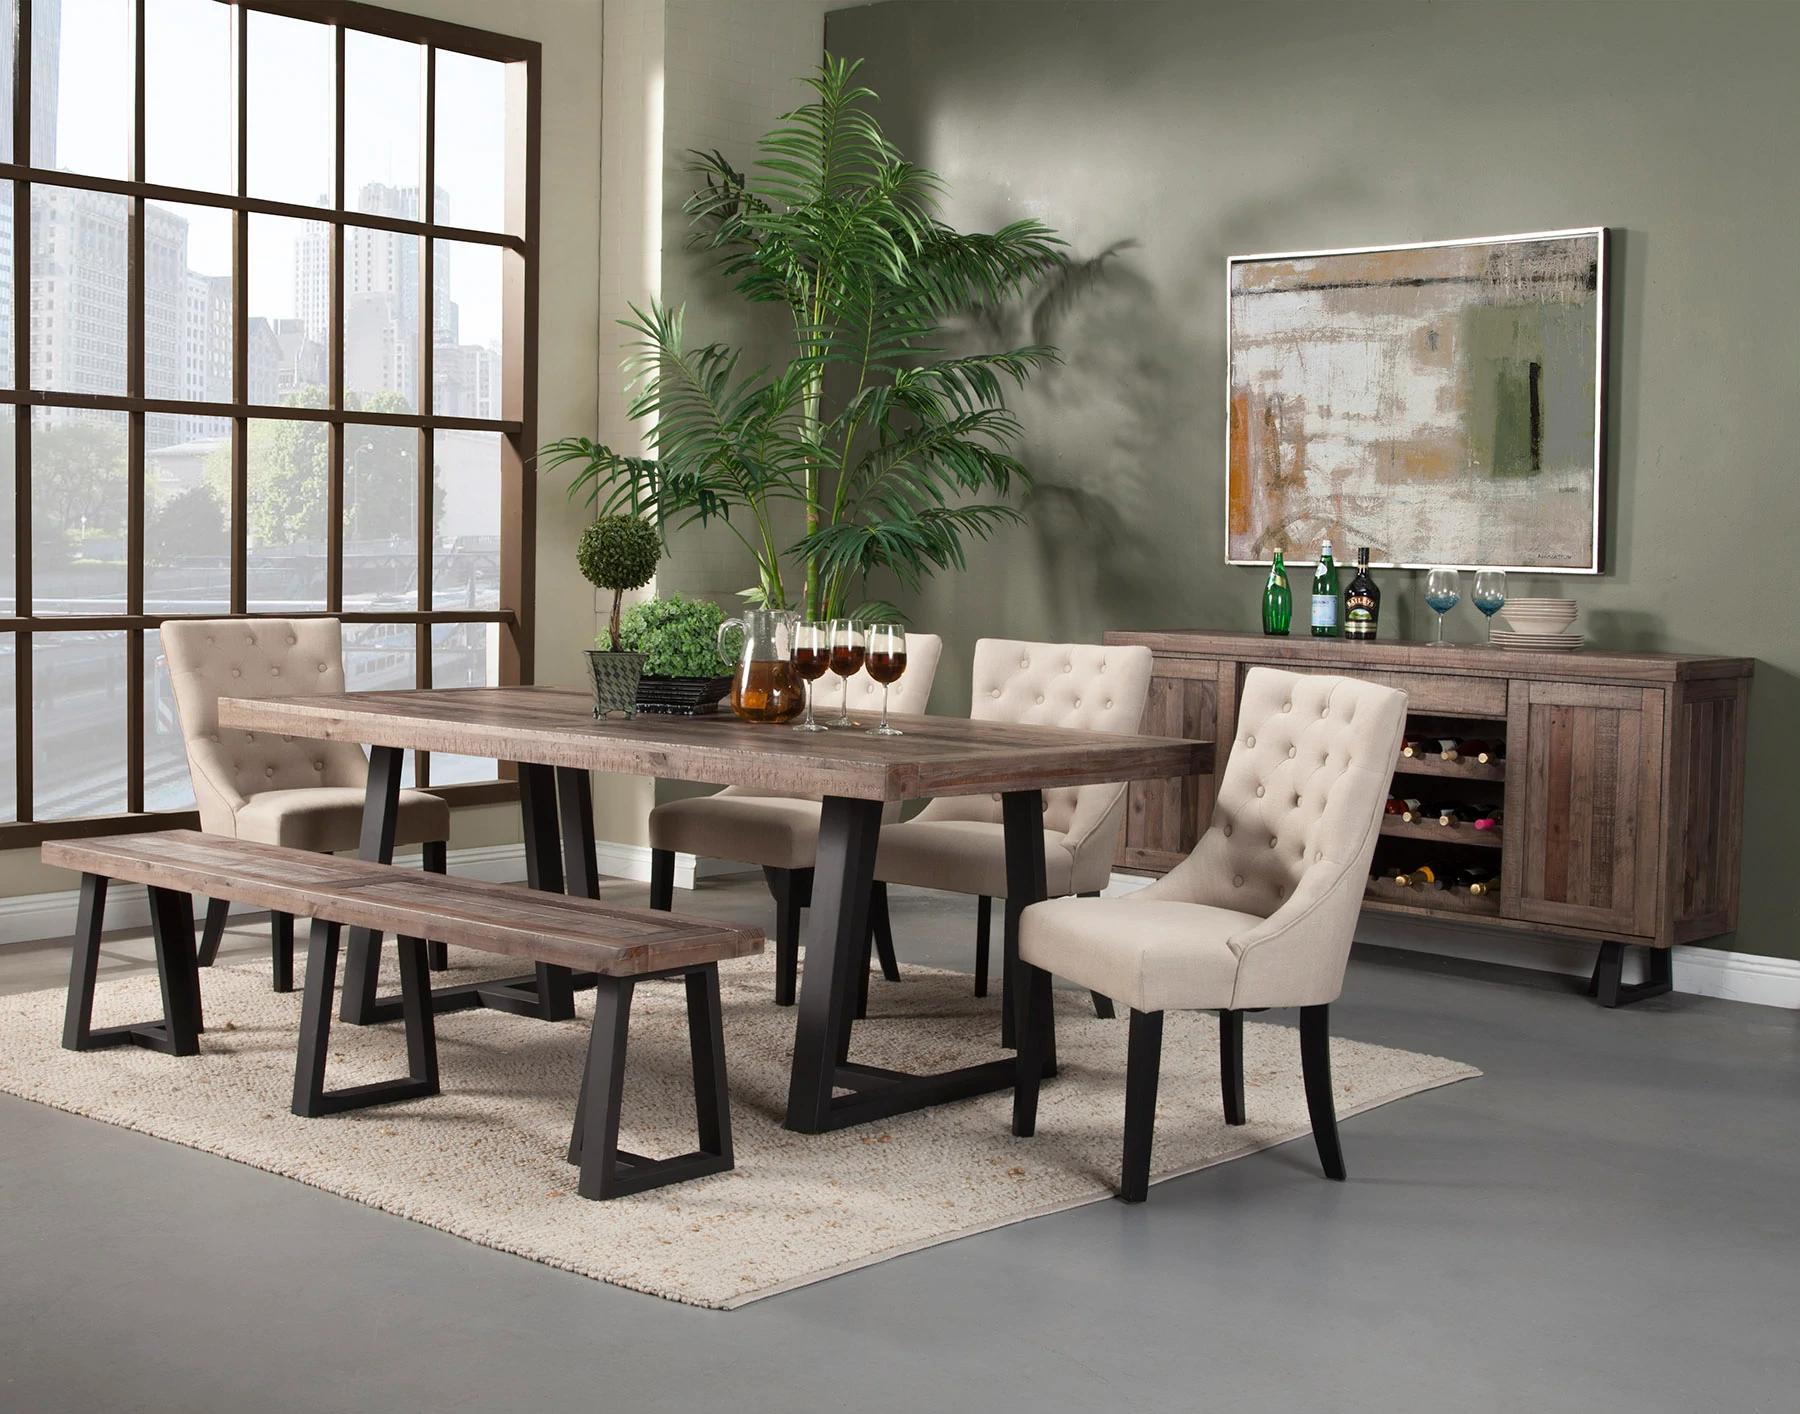 Traditional, Rustic Dining Table PRAIRIE 1568-01 in Natural, Black 